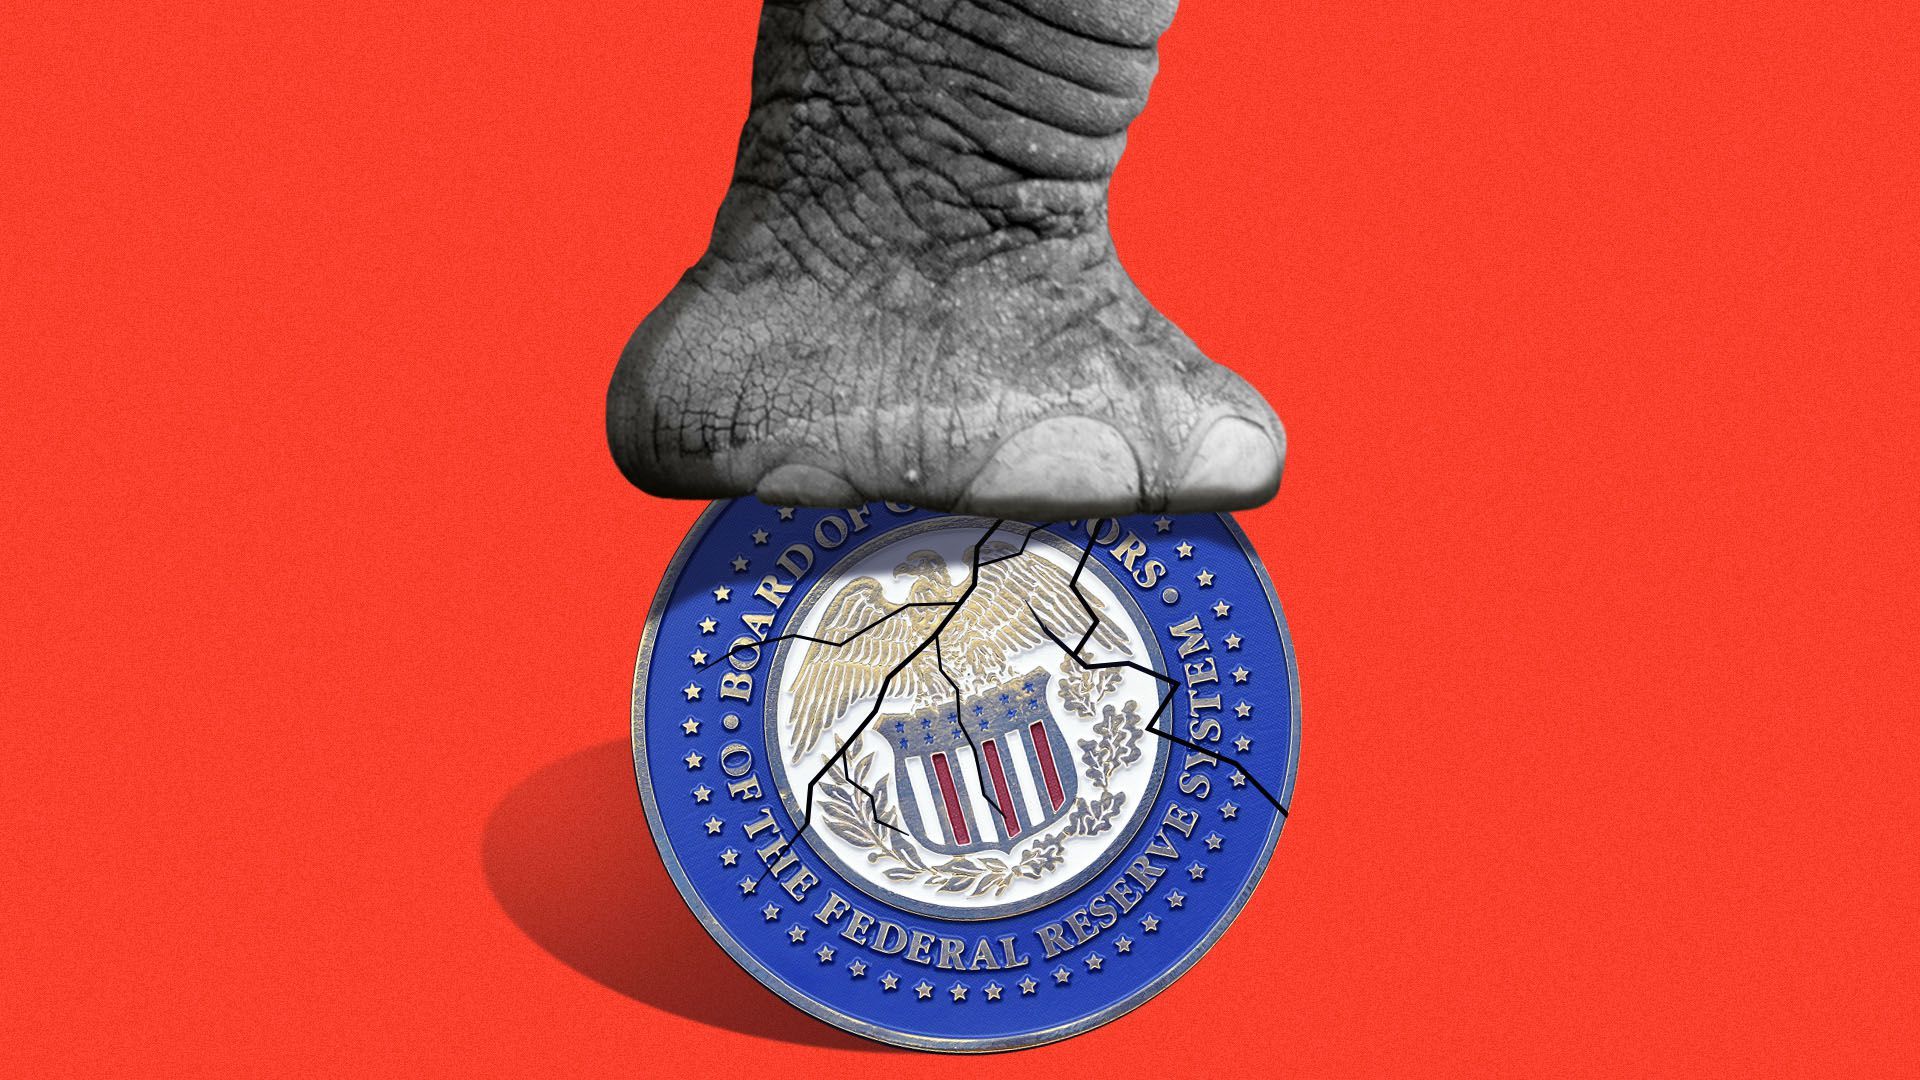 Illustration of an elephant's foot crushing the Federal Reserve seal.